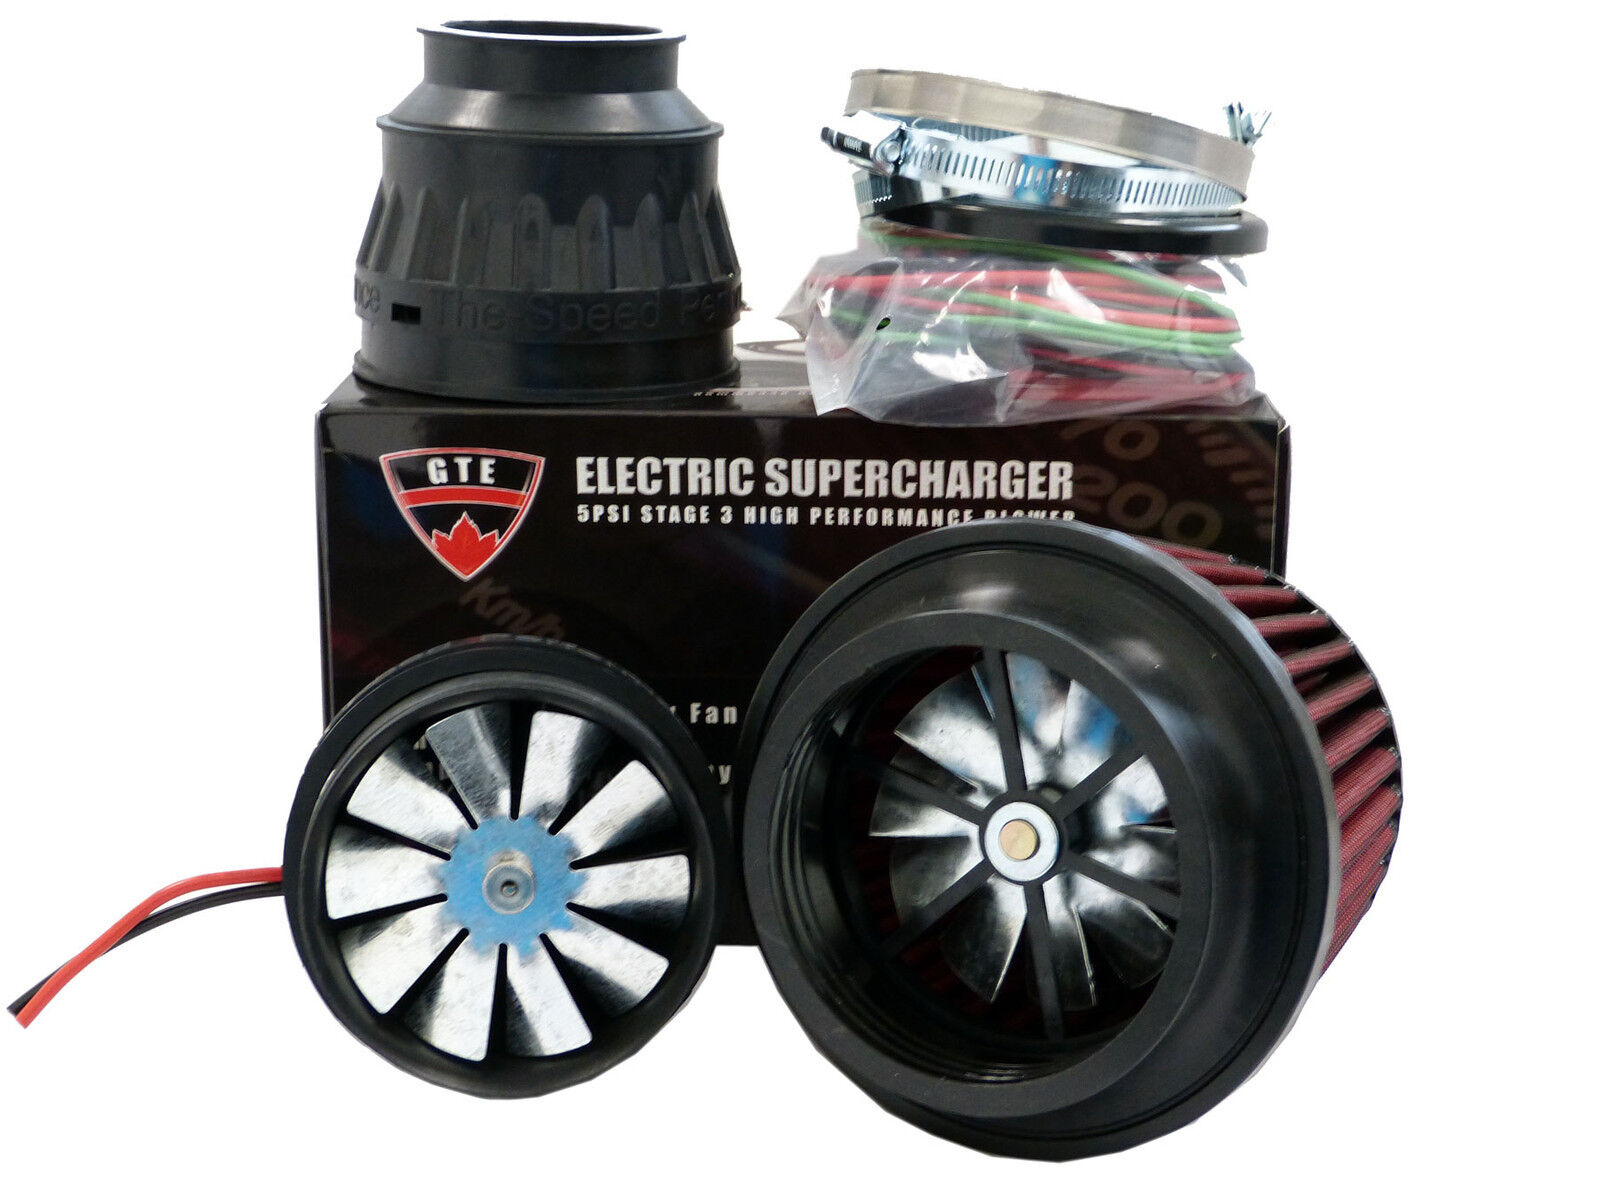 5PSI ELECTRIC SUPERCHARGER TURBO ADD HORSEPOWER + TORQUE INTAKE FOR Mercedes